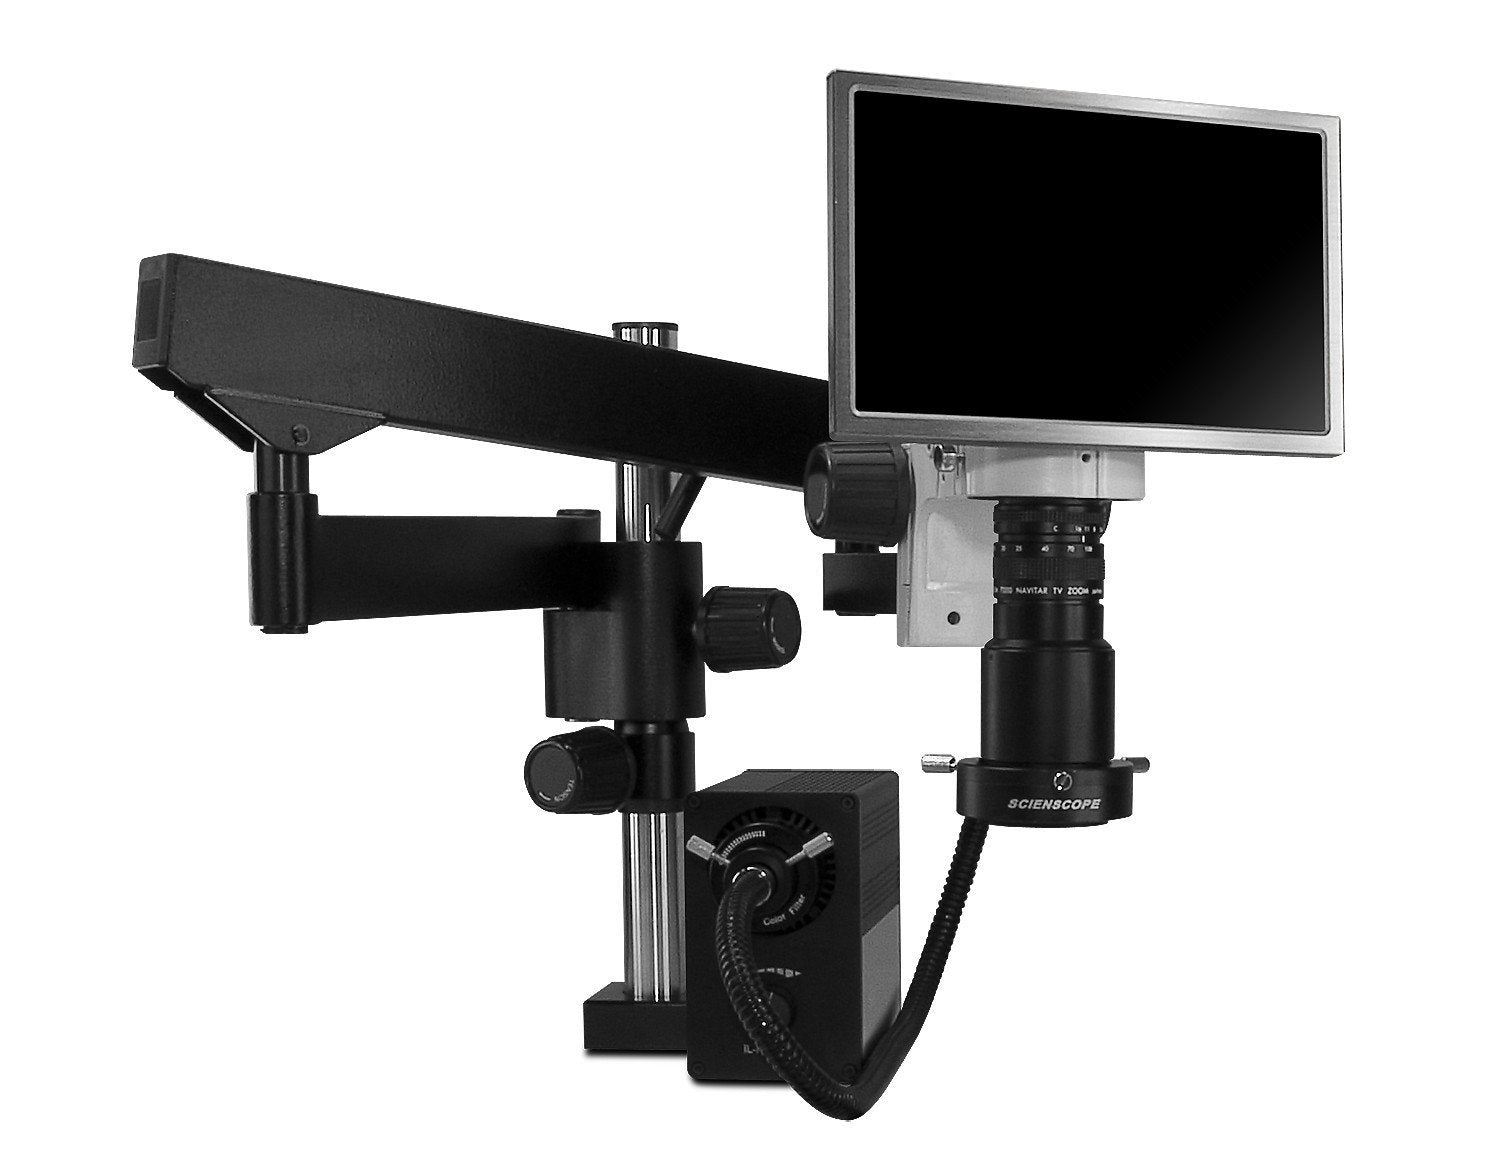 Scienscope MAC2-PK3-AN HD Macro Zoom Video System - Camera & Monitor with LED Annular Ring Light on Heavy Duty Articulating Arm